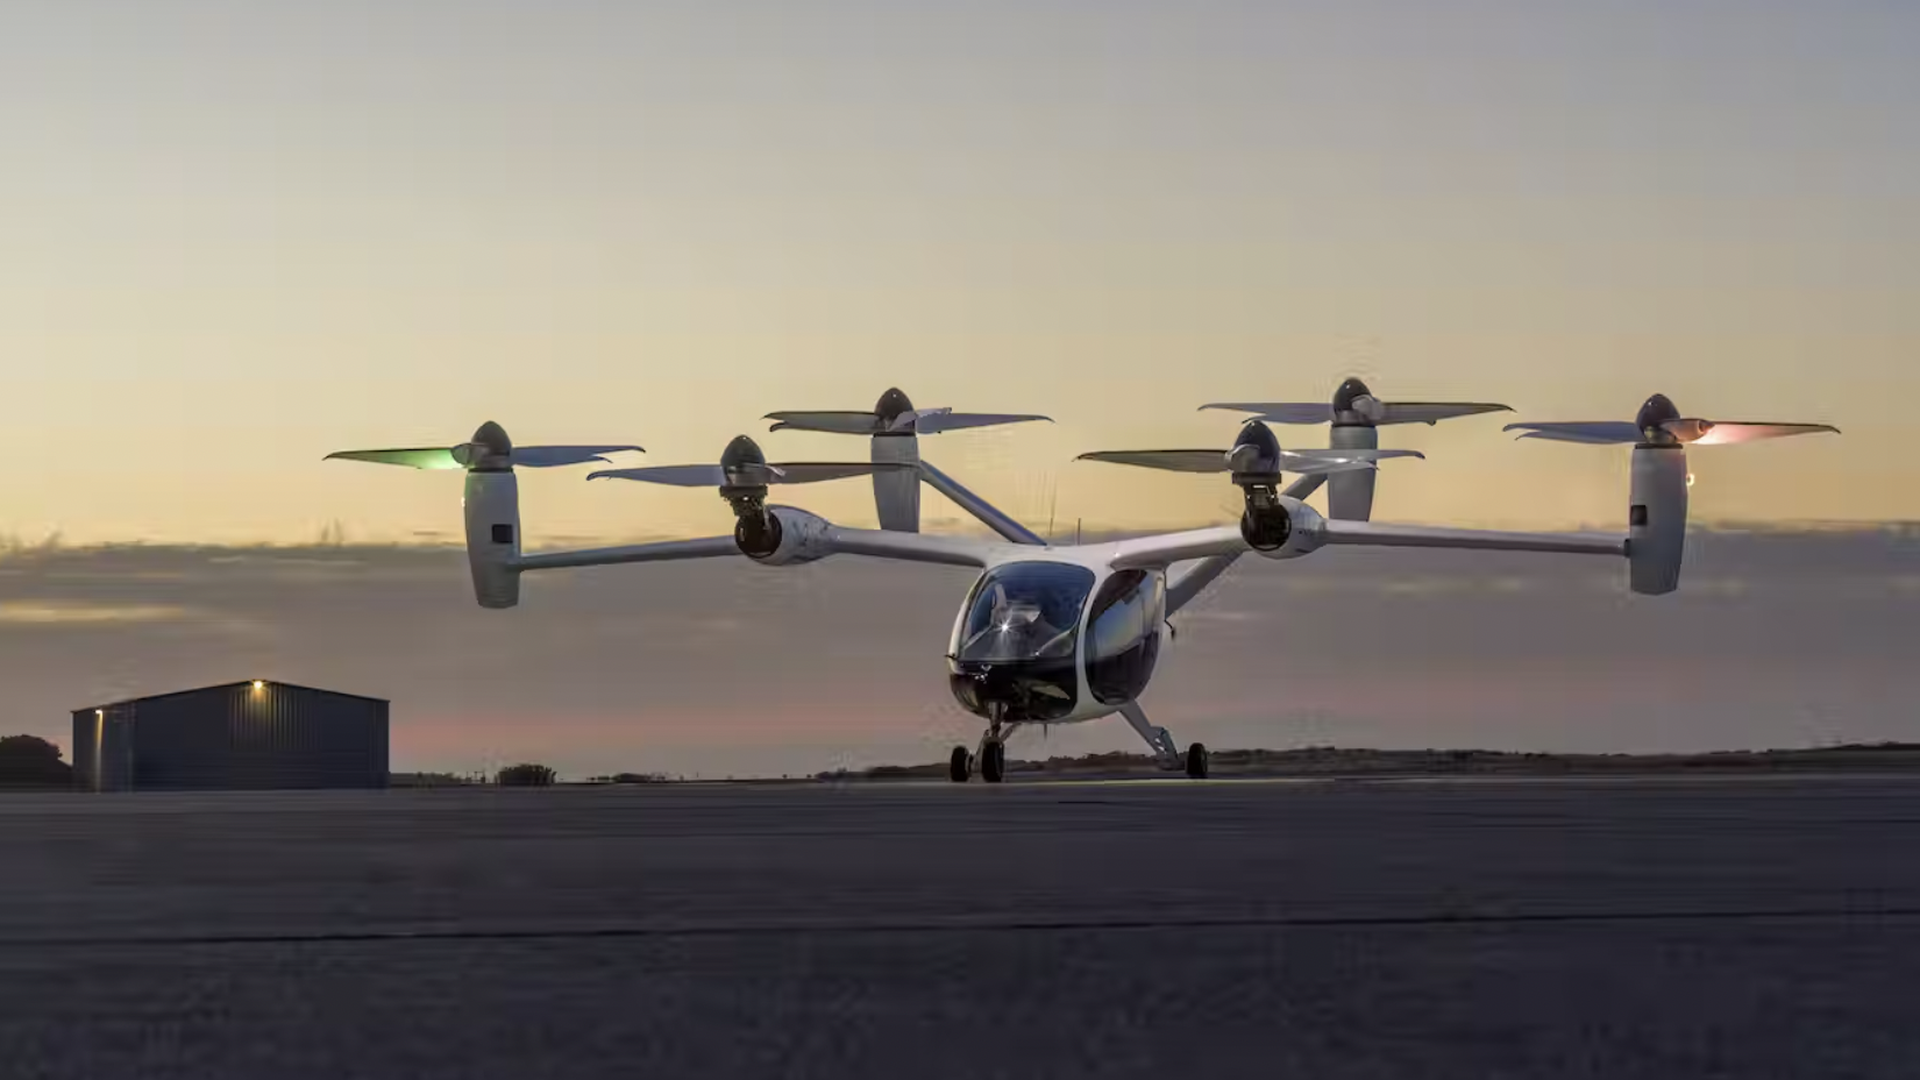 The Joby aircraft poised for takeoff at the company's manufacturing and flight testing facility in Marina, California. 